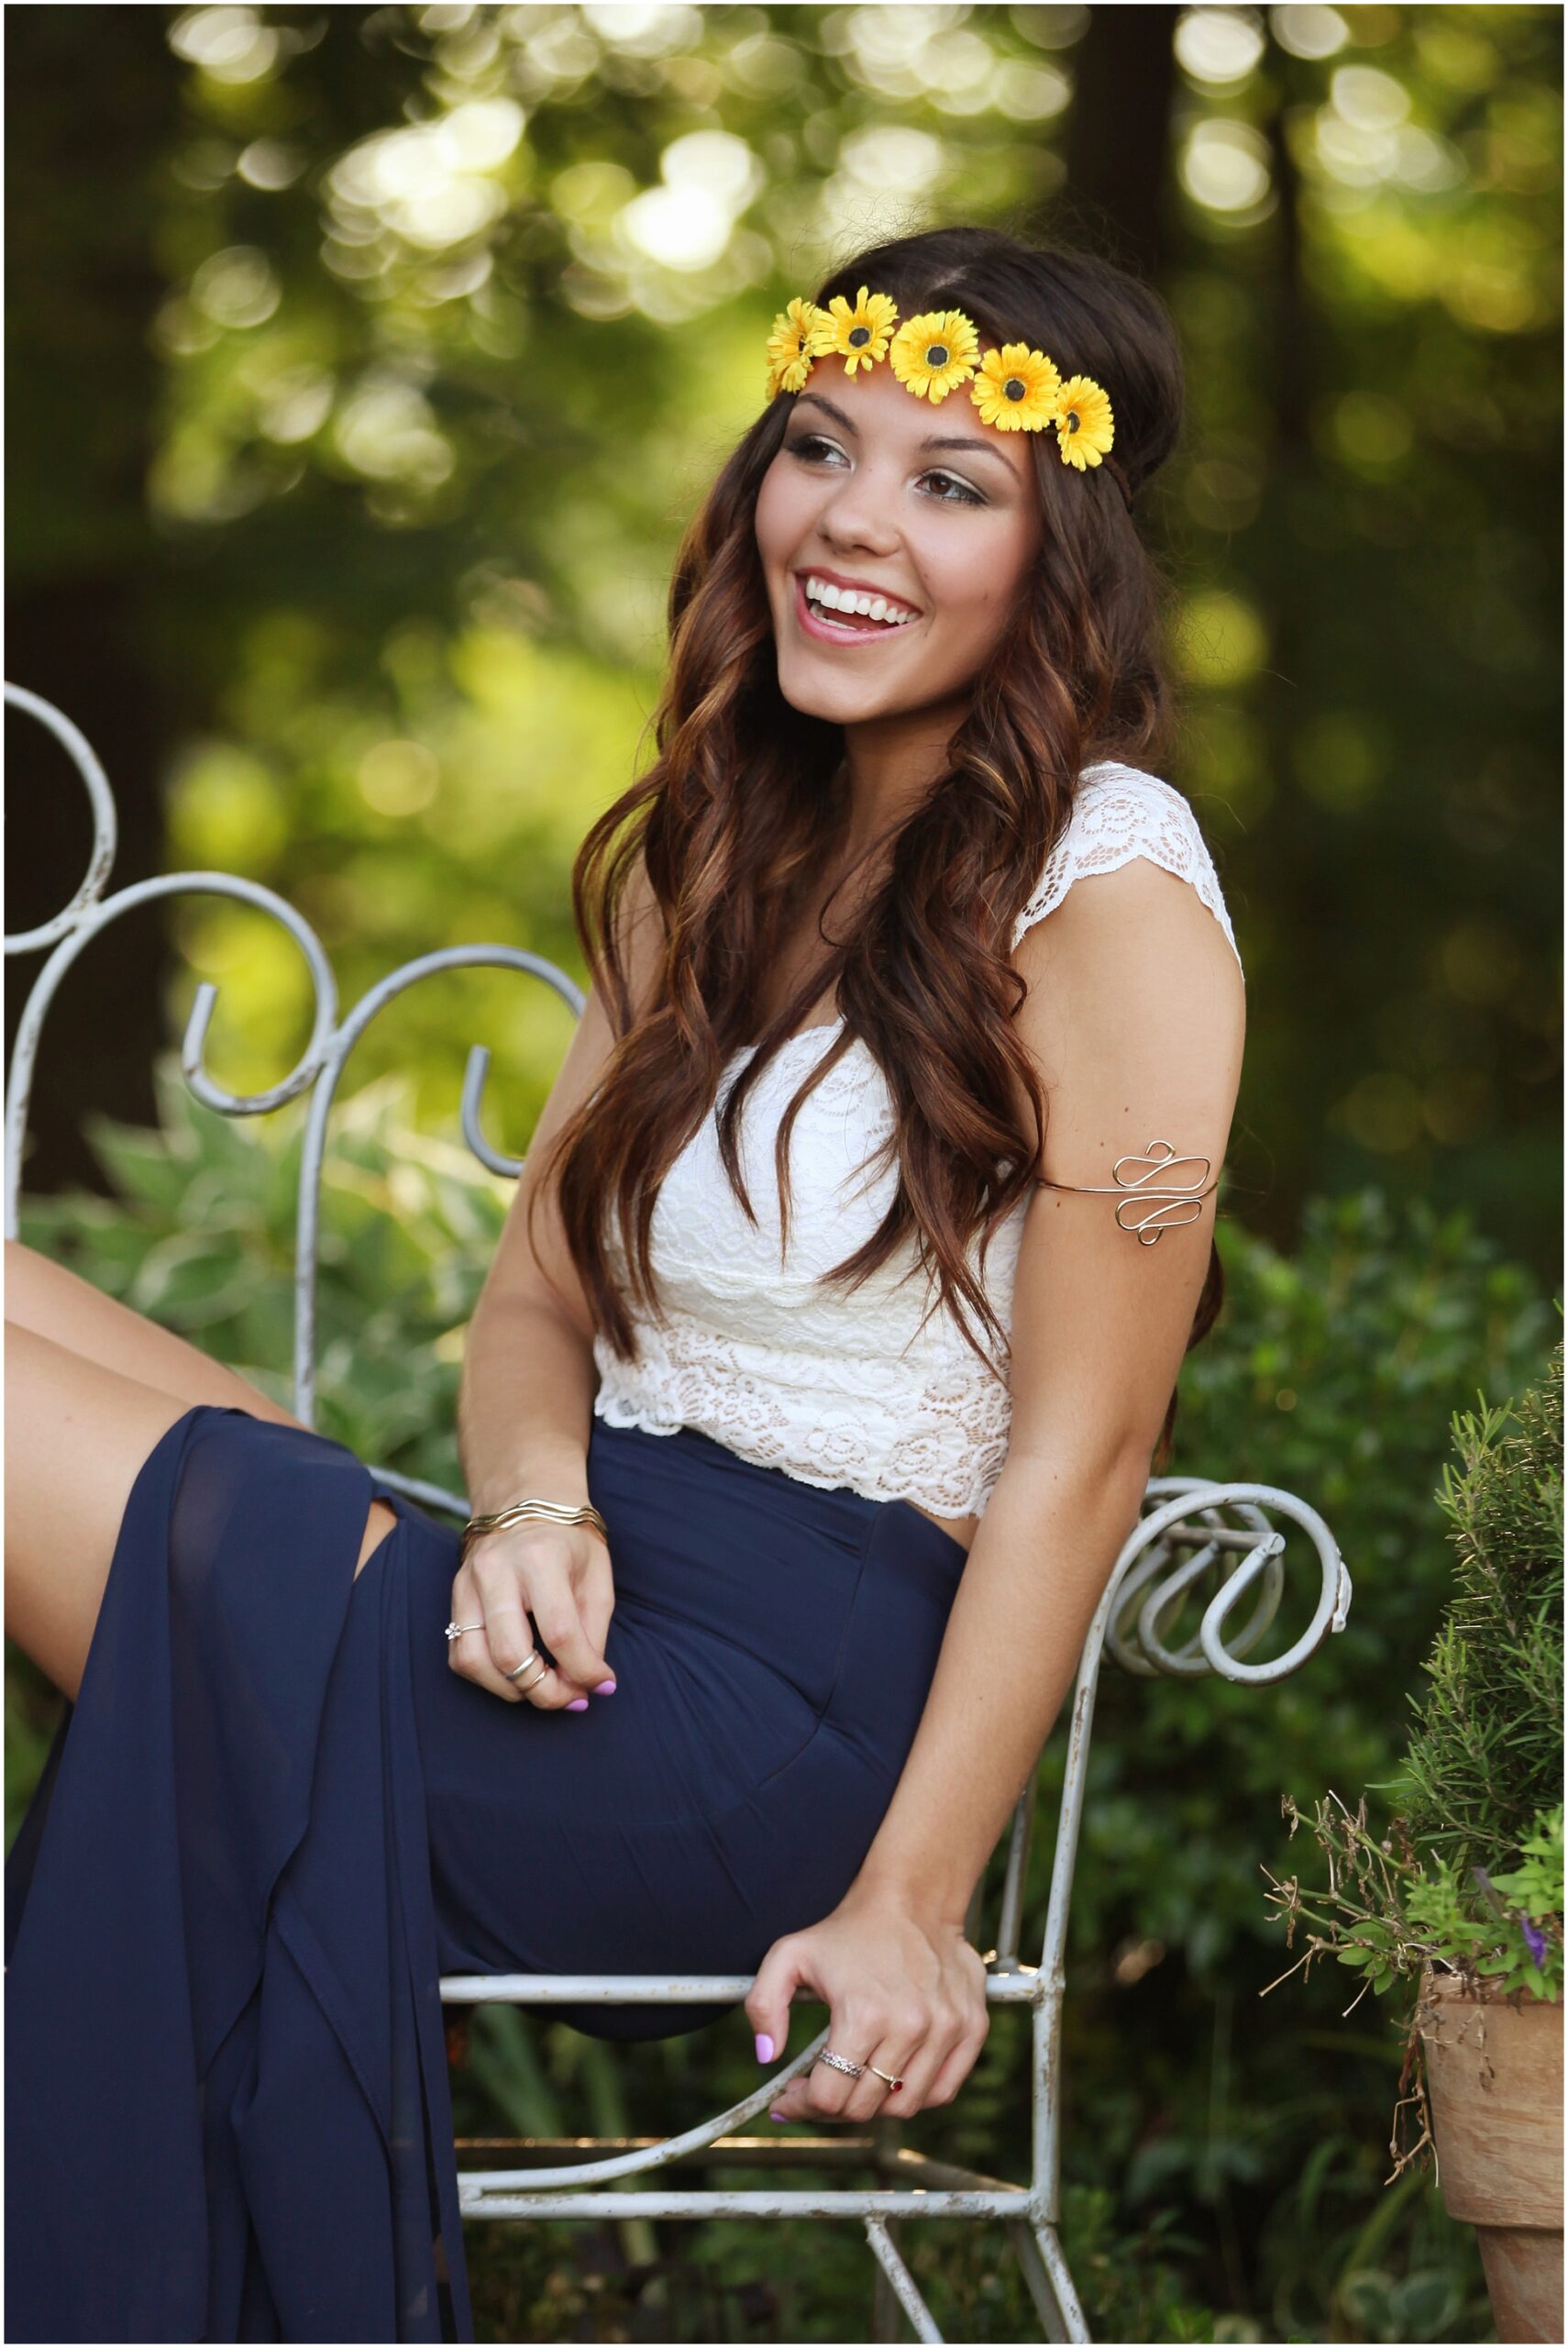 Bohemian Inspired Senior Session | Two Chics Photography | www.twochicsphotography.com